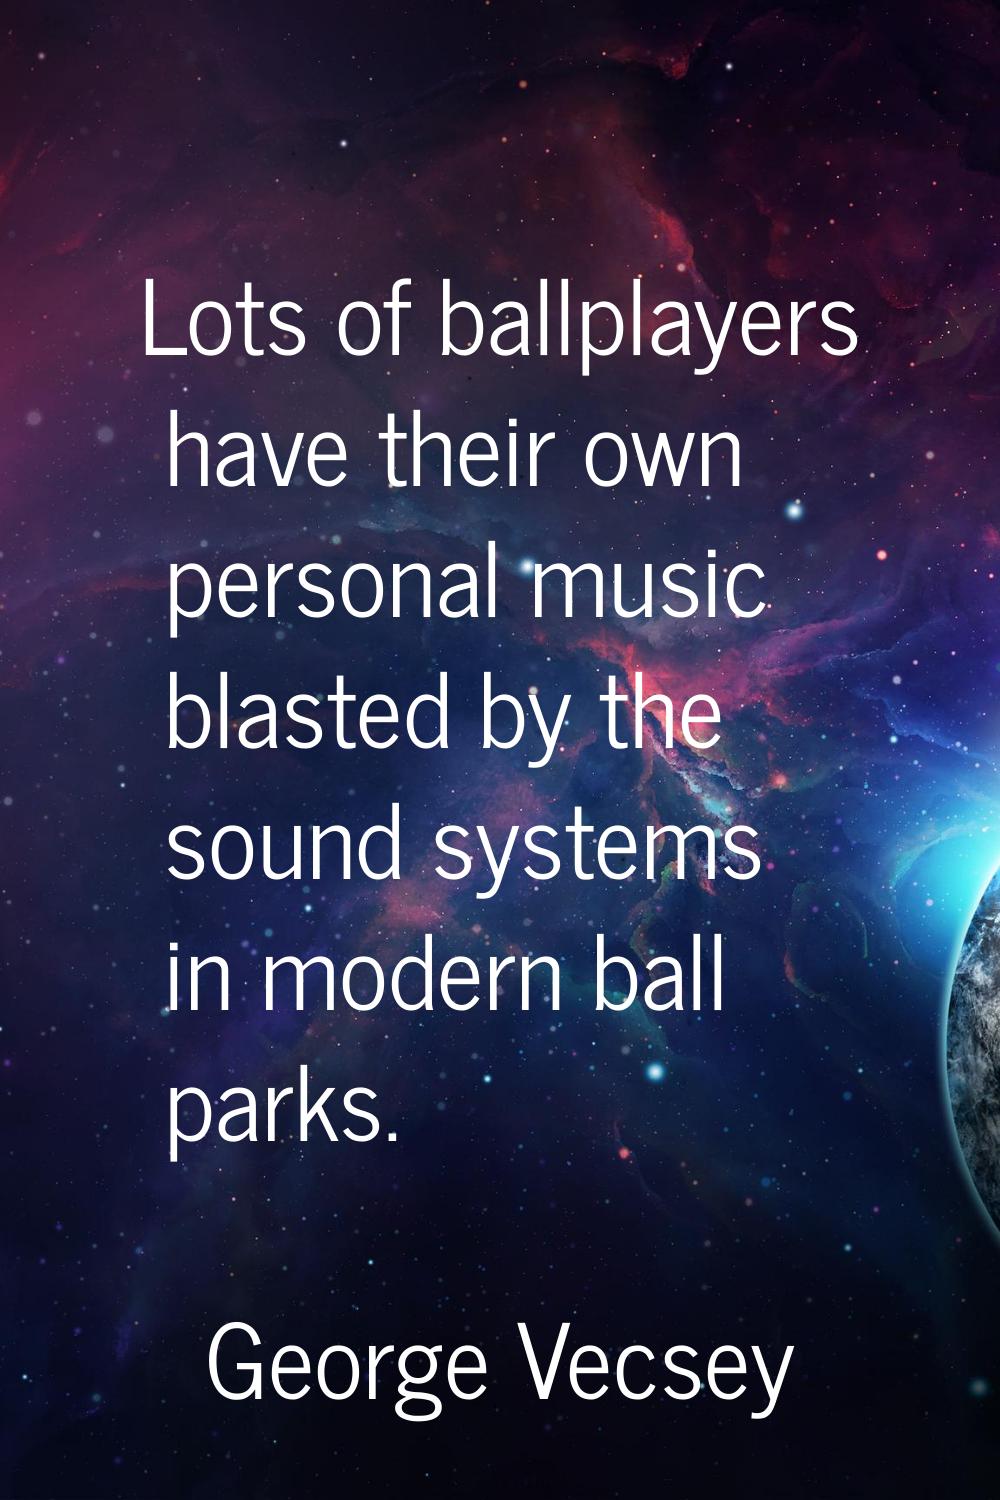 Lots of ballplayers have their own personal music blasted by the sound systems in modern ball parks